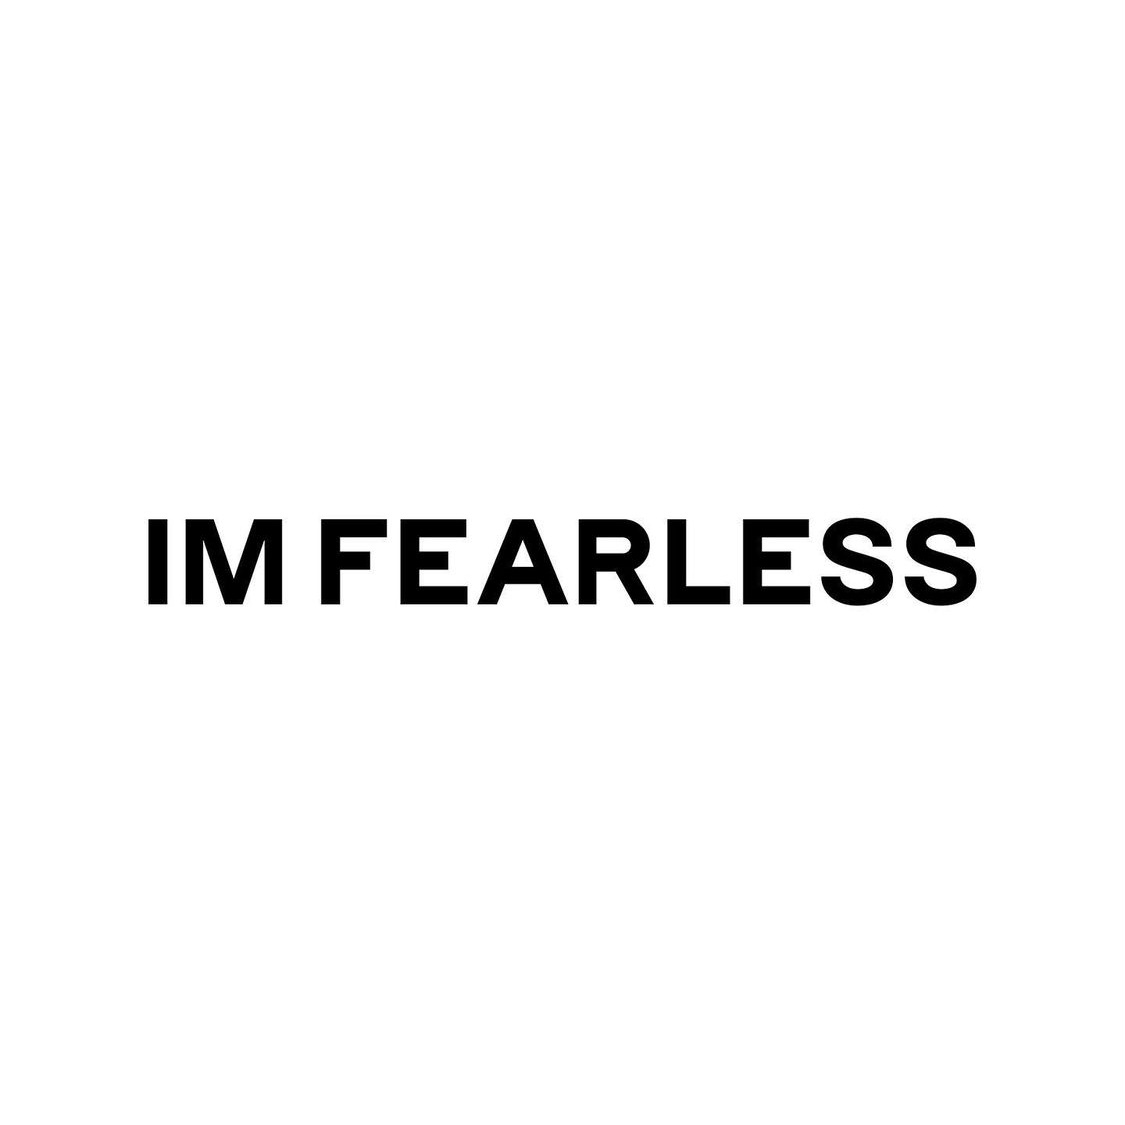 i'm fearless